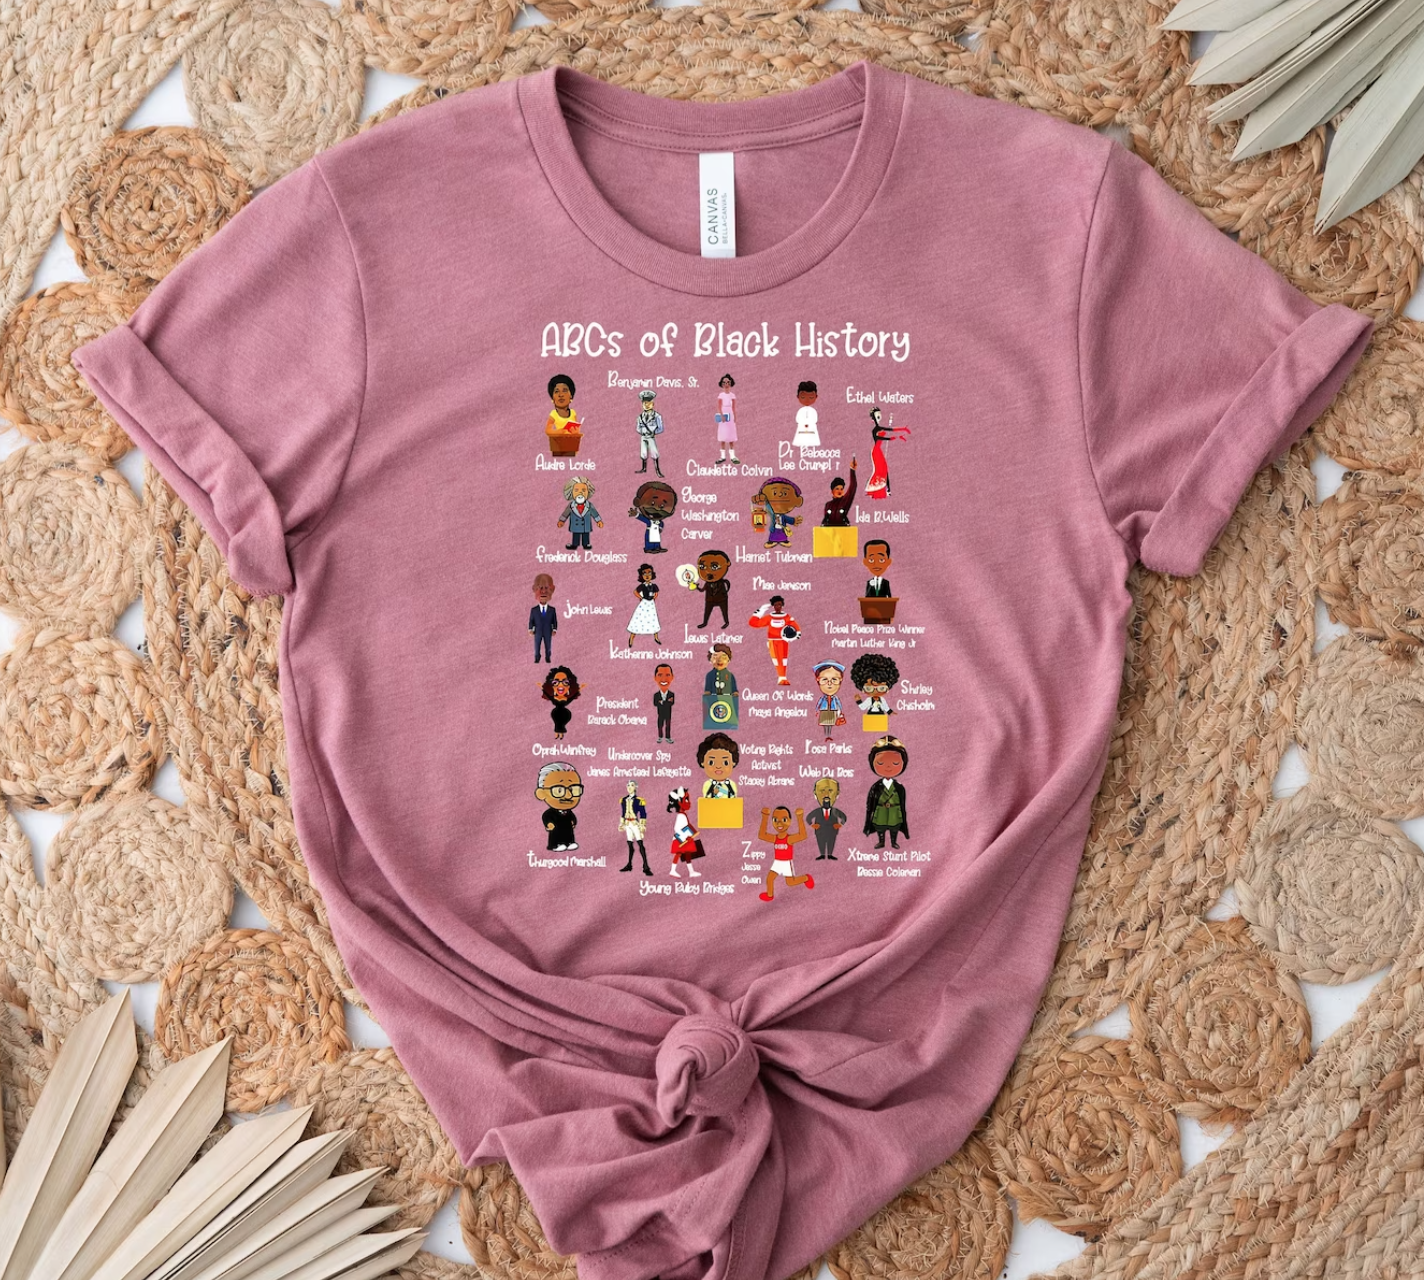 Pink Tee with figures corresponding to Black History